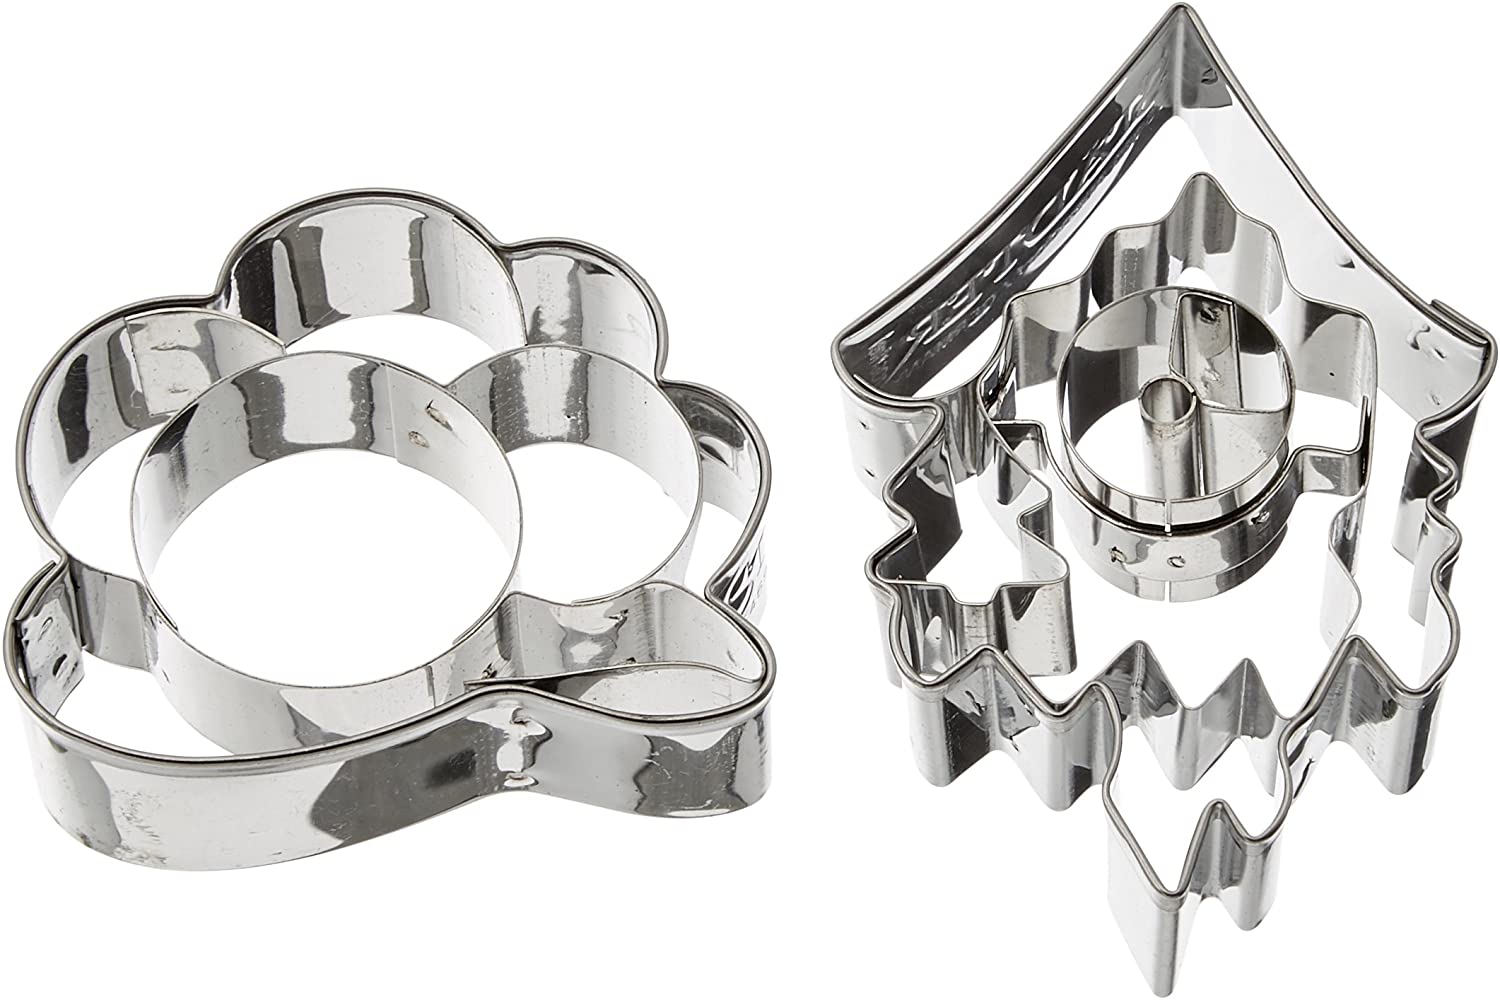 Städter Cookie Cutter Stainless Steel Silver 7 x 5 x 1 cm 2 Units